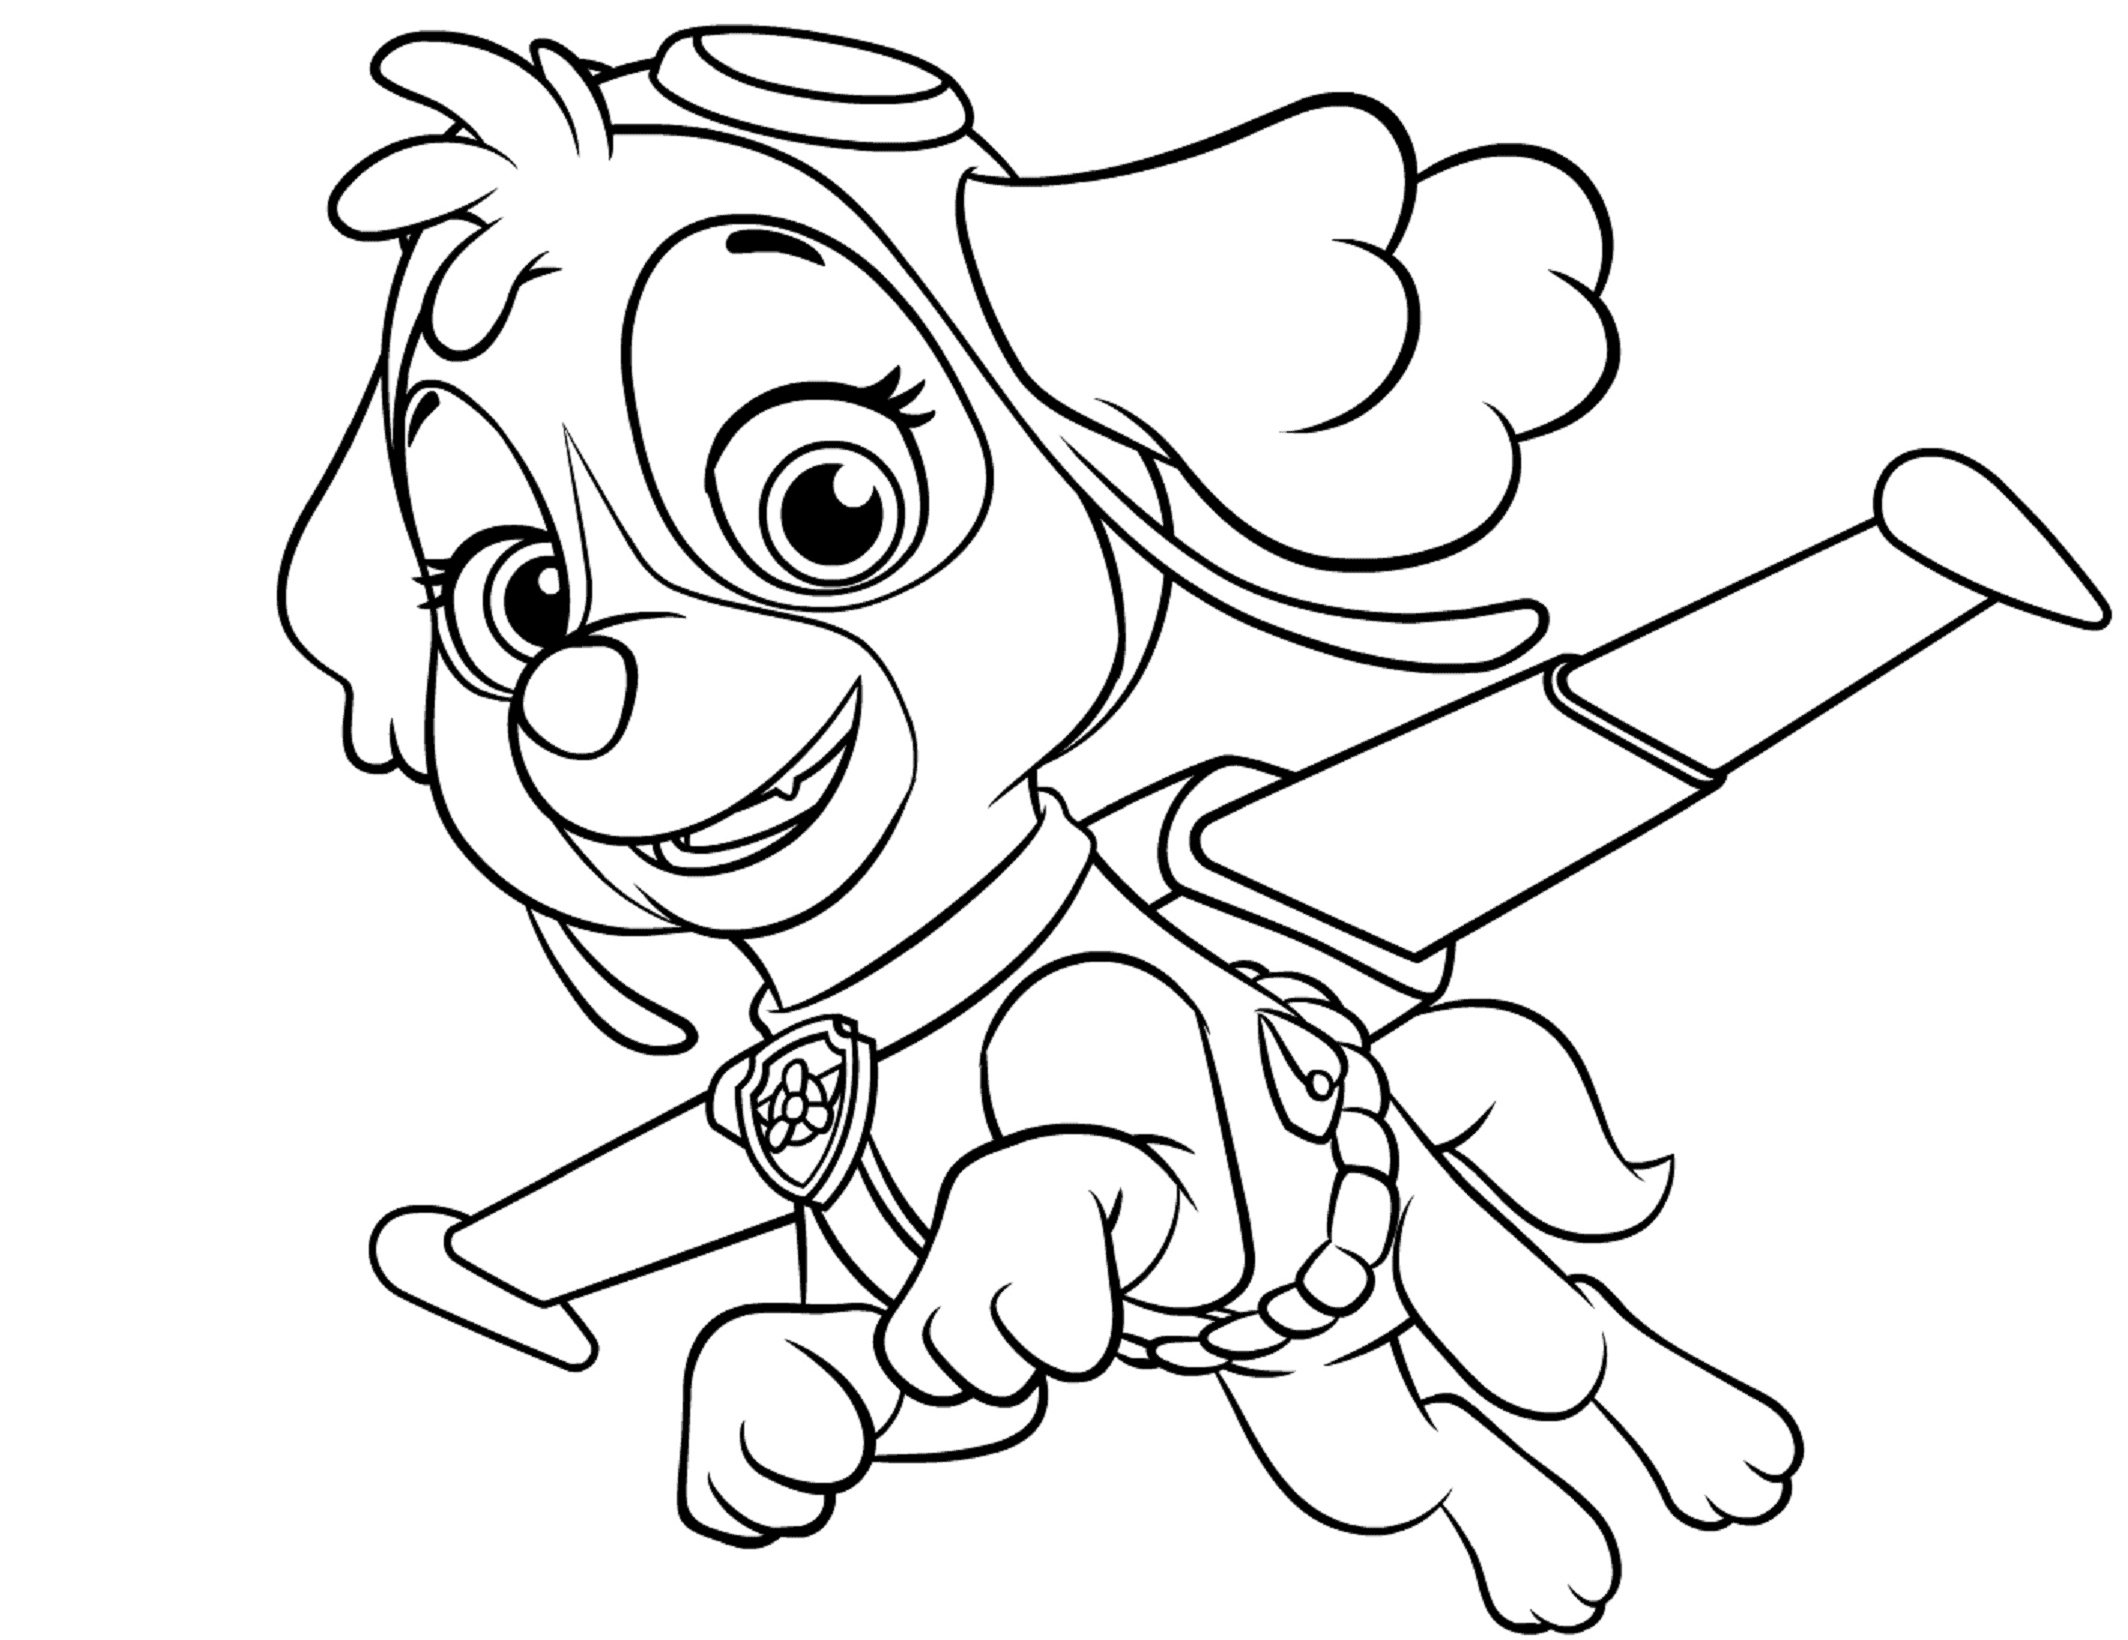 Skye Flying Paw Patrol Coloring Pages   Coloring Cool